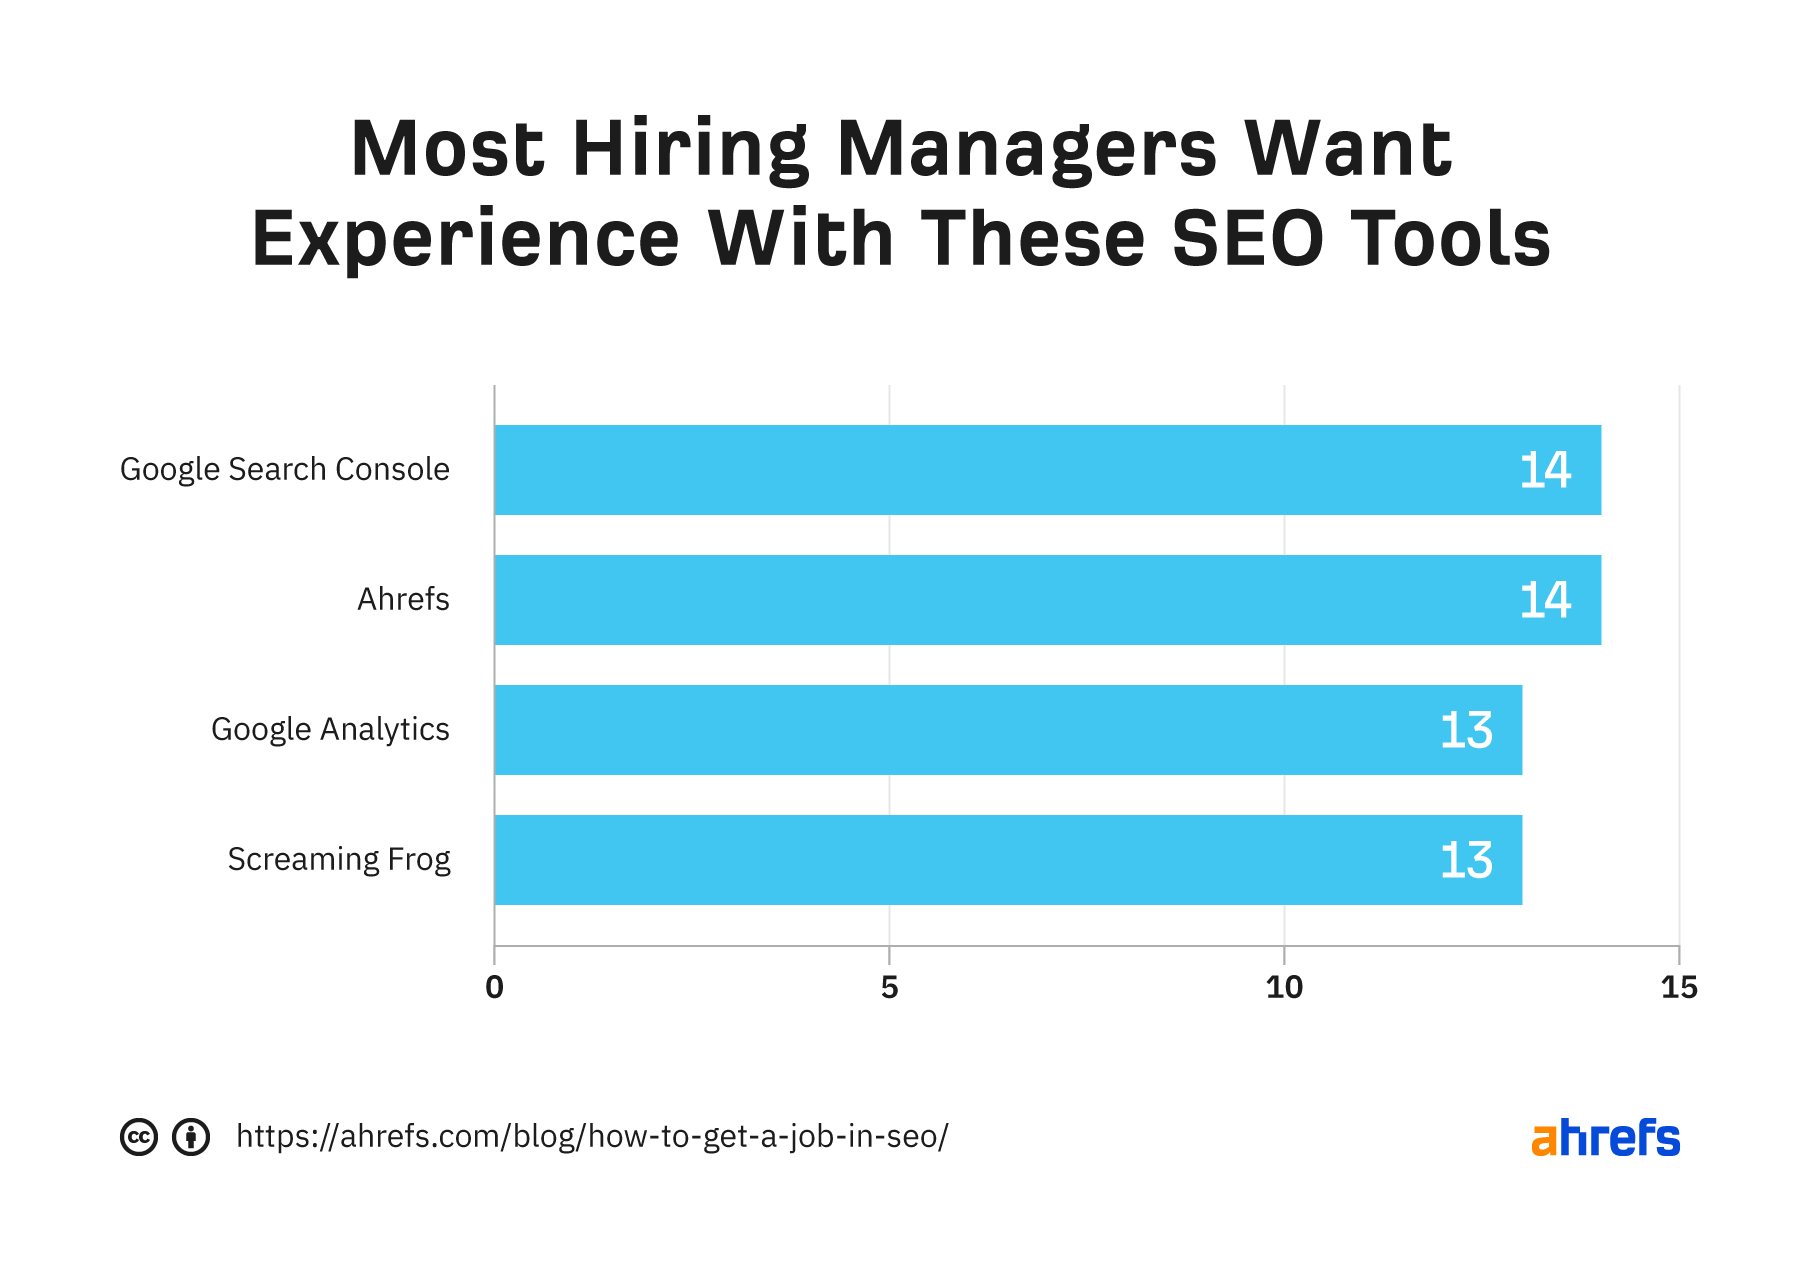 Most hiring managers want to hire those with experience in GSC, Ahrefs, GA, and Screaming Frog